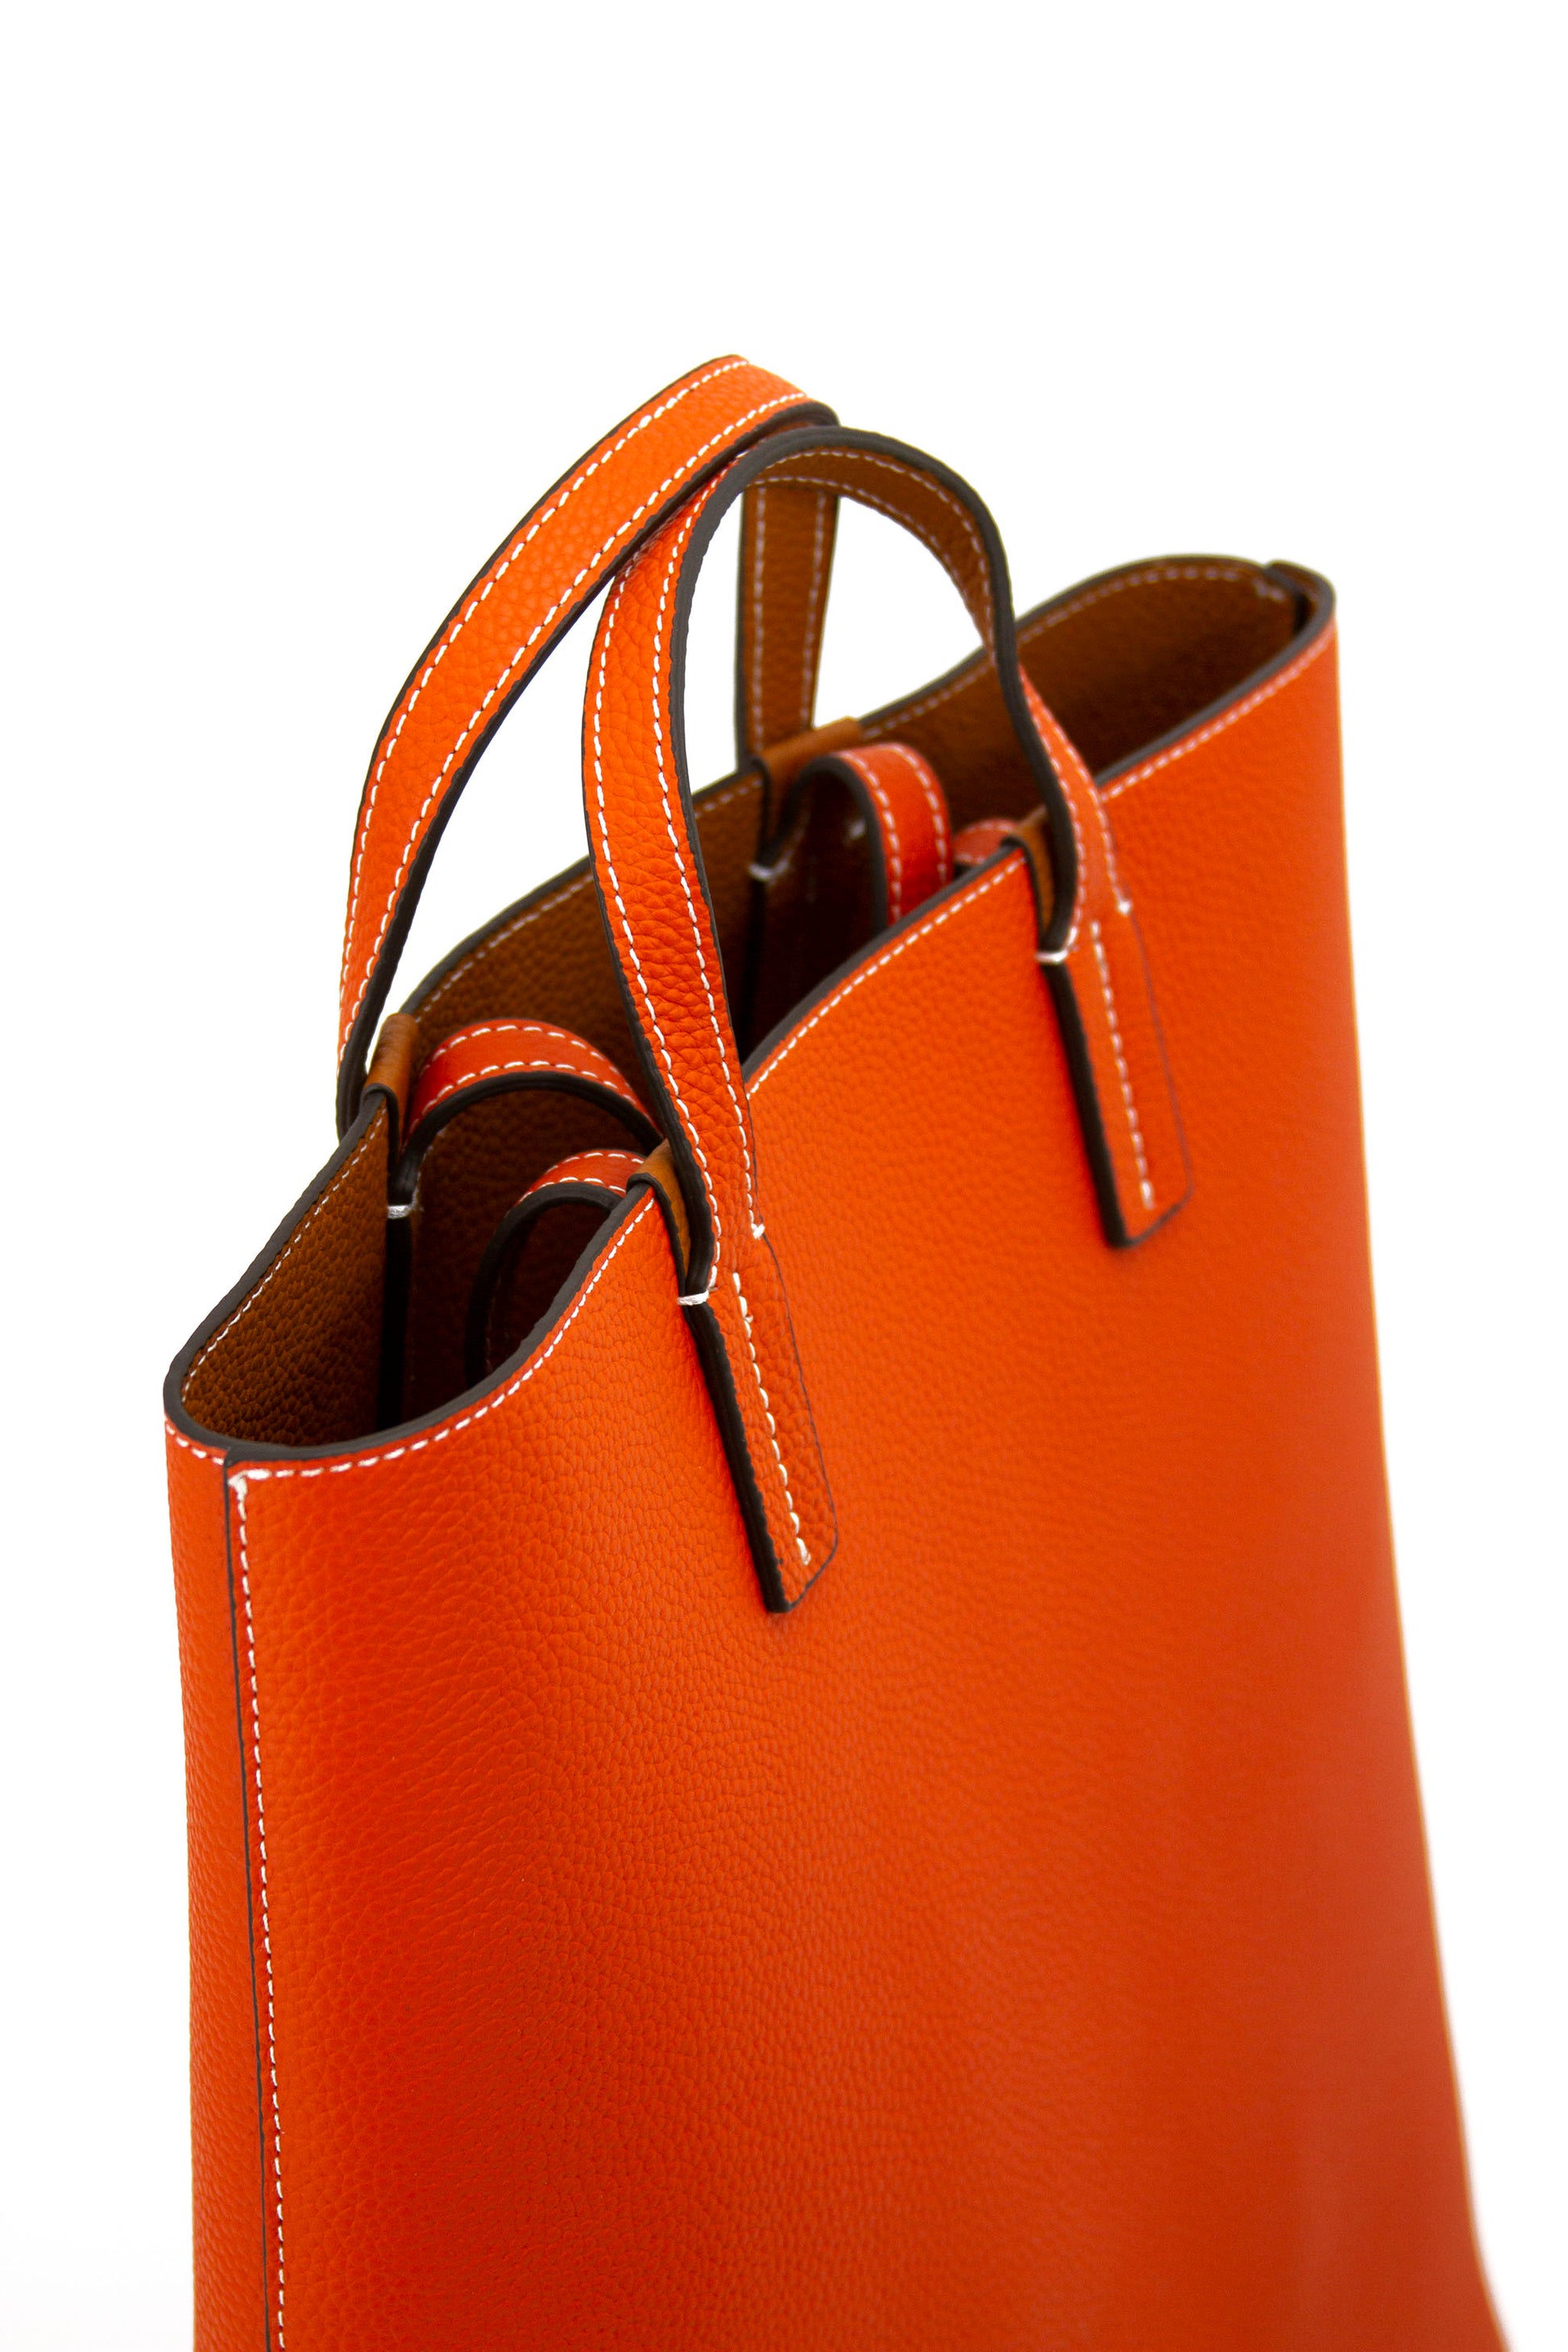 Double Sided Color Leather Bag-OR-5